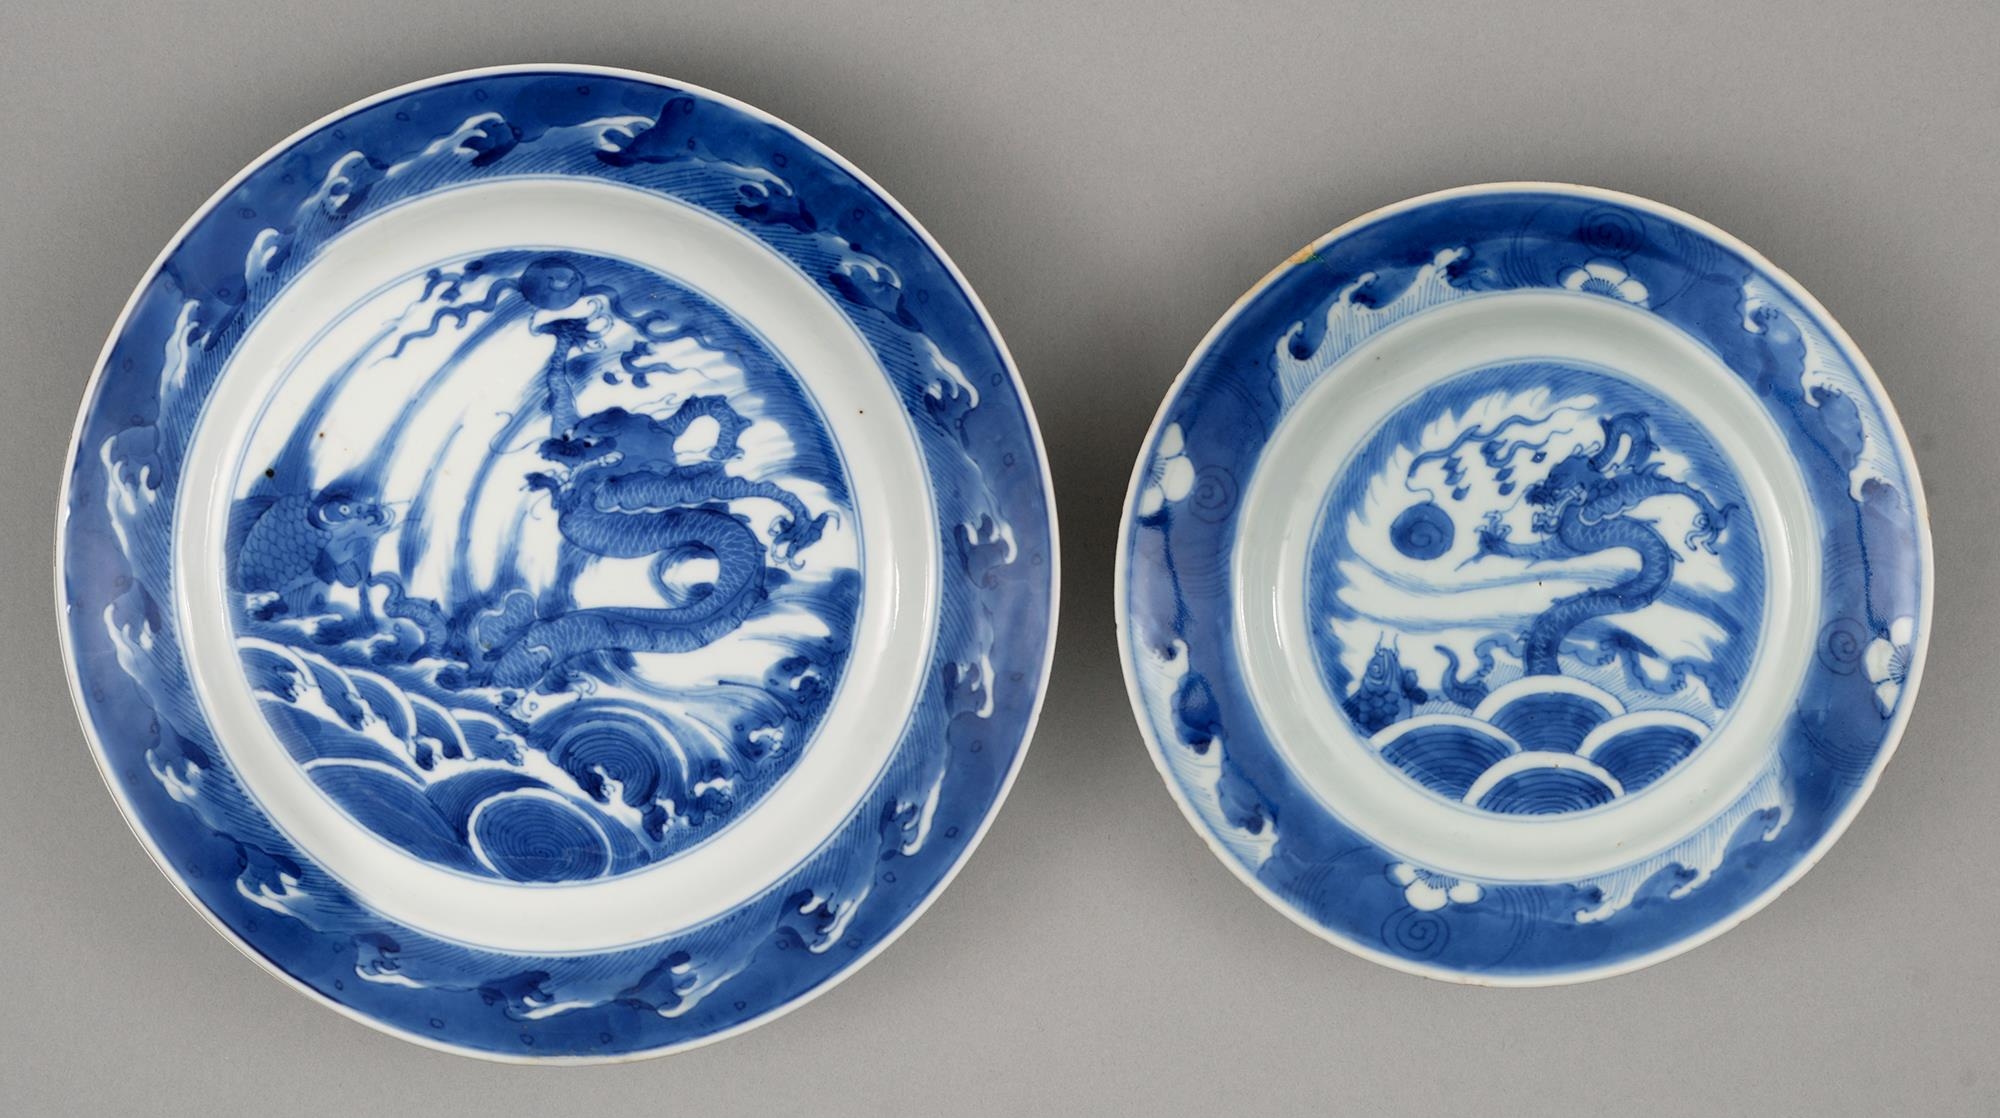 Two graduated Chinese blue and white plates, 18th c, painted with dragon and carp rising from